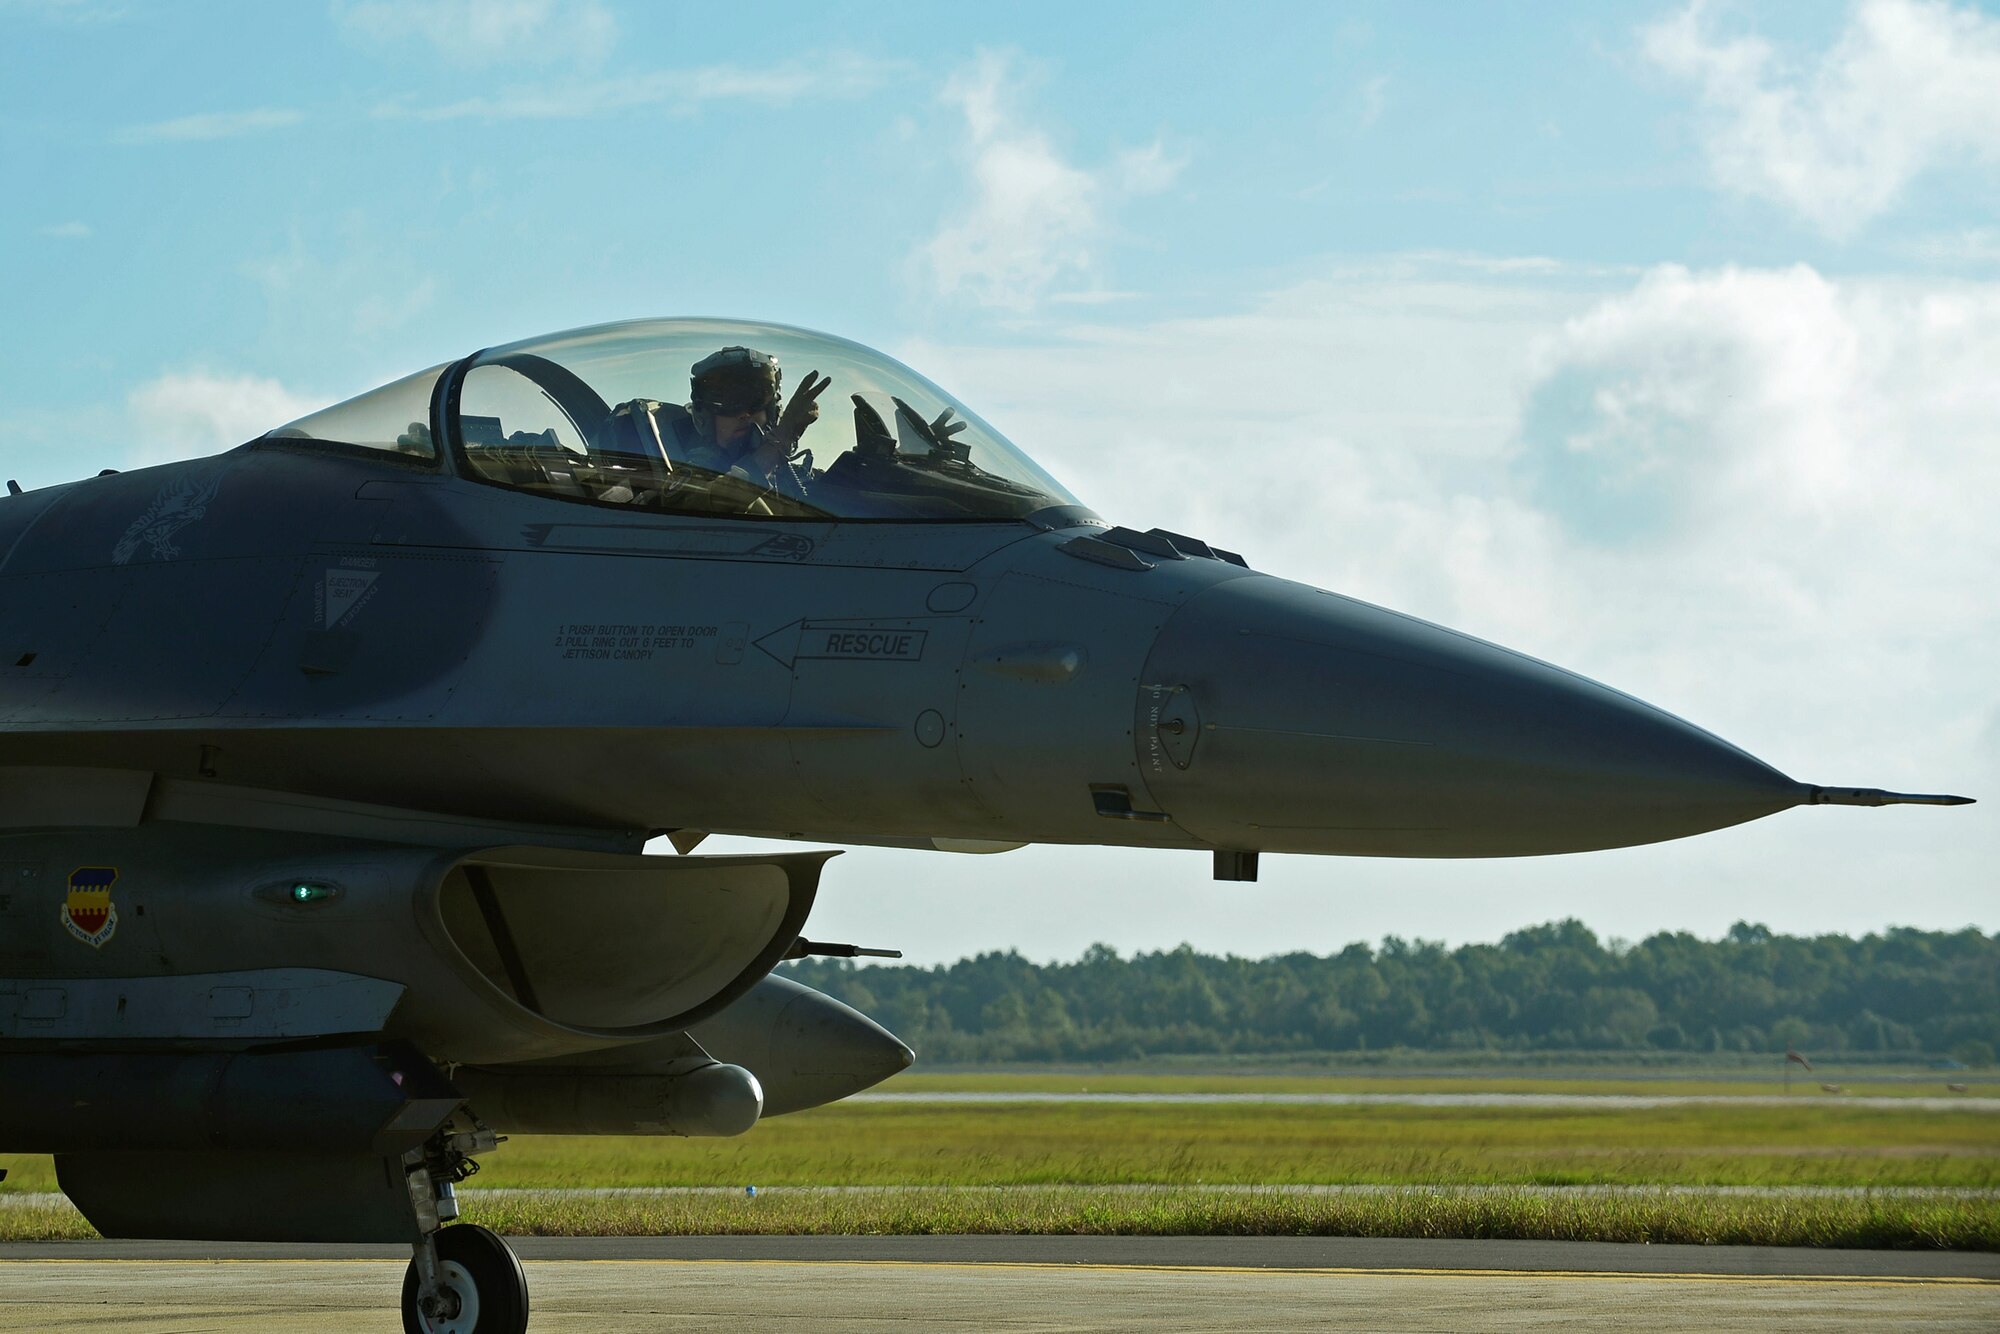 An F-16CM Fighting Falcon pilot assigned to the 20th Fighter Wing taxis in preparation for takeoff at Shaw Air Force Base, S.C., Oct. 6, 2016. Nearly 50 aircraft were evacuated from Shaw in anticipation of Hurricane Matthew, while the remainder were stored inside various hangars to keep them safe. (U.S. Air Force photo by Airman BrieAnna Stillman)